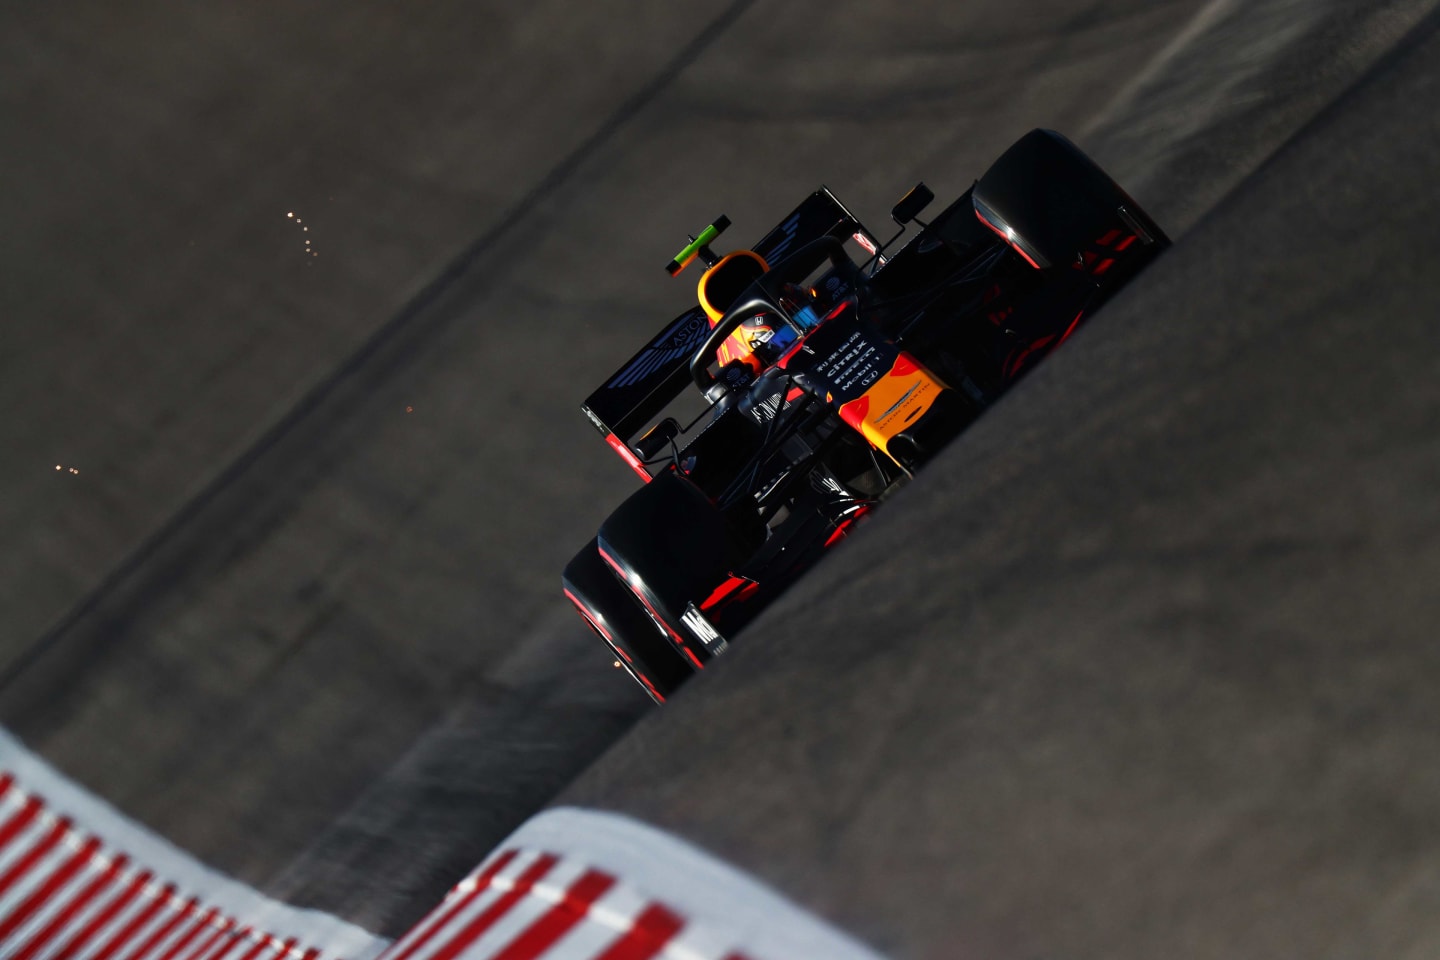 AUSTIN, TEXAS - NOVEMBER 02: Alexander Albon of Thailand driving the (23) Aston Martin Red Bull Racing RB15 on track during qualifying for the F1 Grand Prix of USA at Circuit of The Americas on November 02, 2019 in Austin, Texas. (Photo by Dan Istitene/Getty Images)